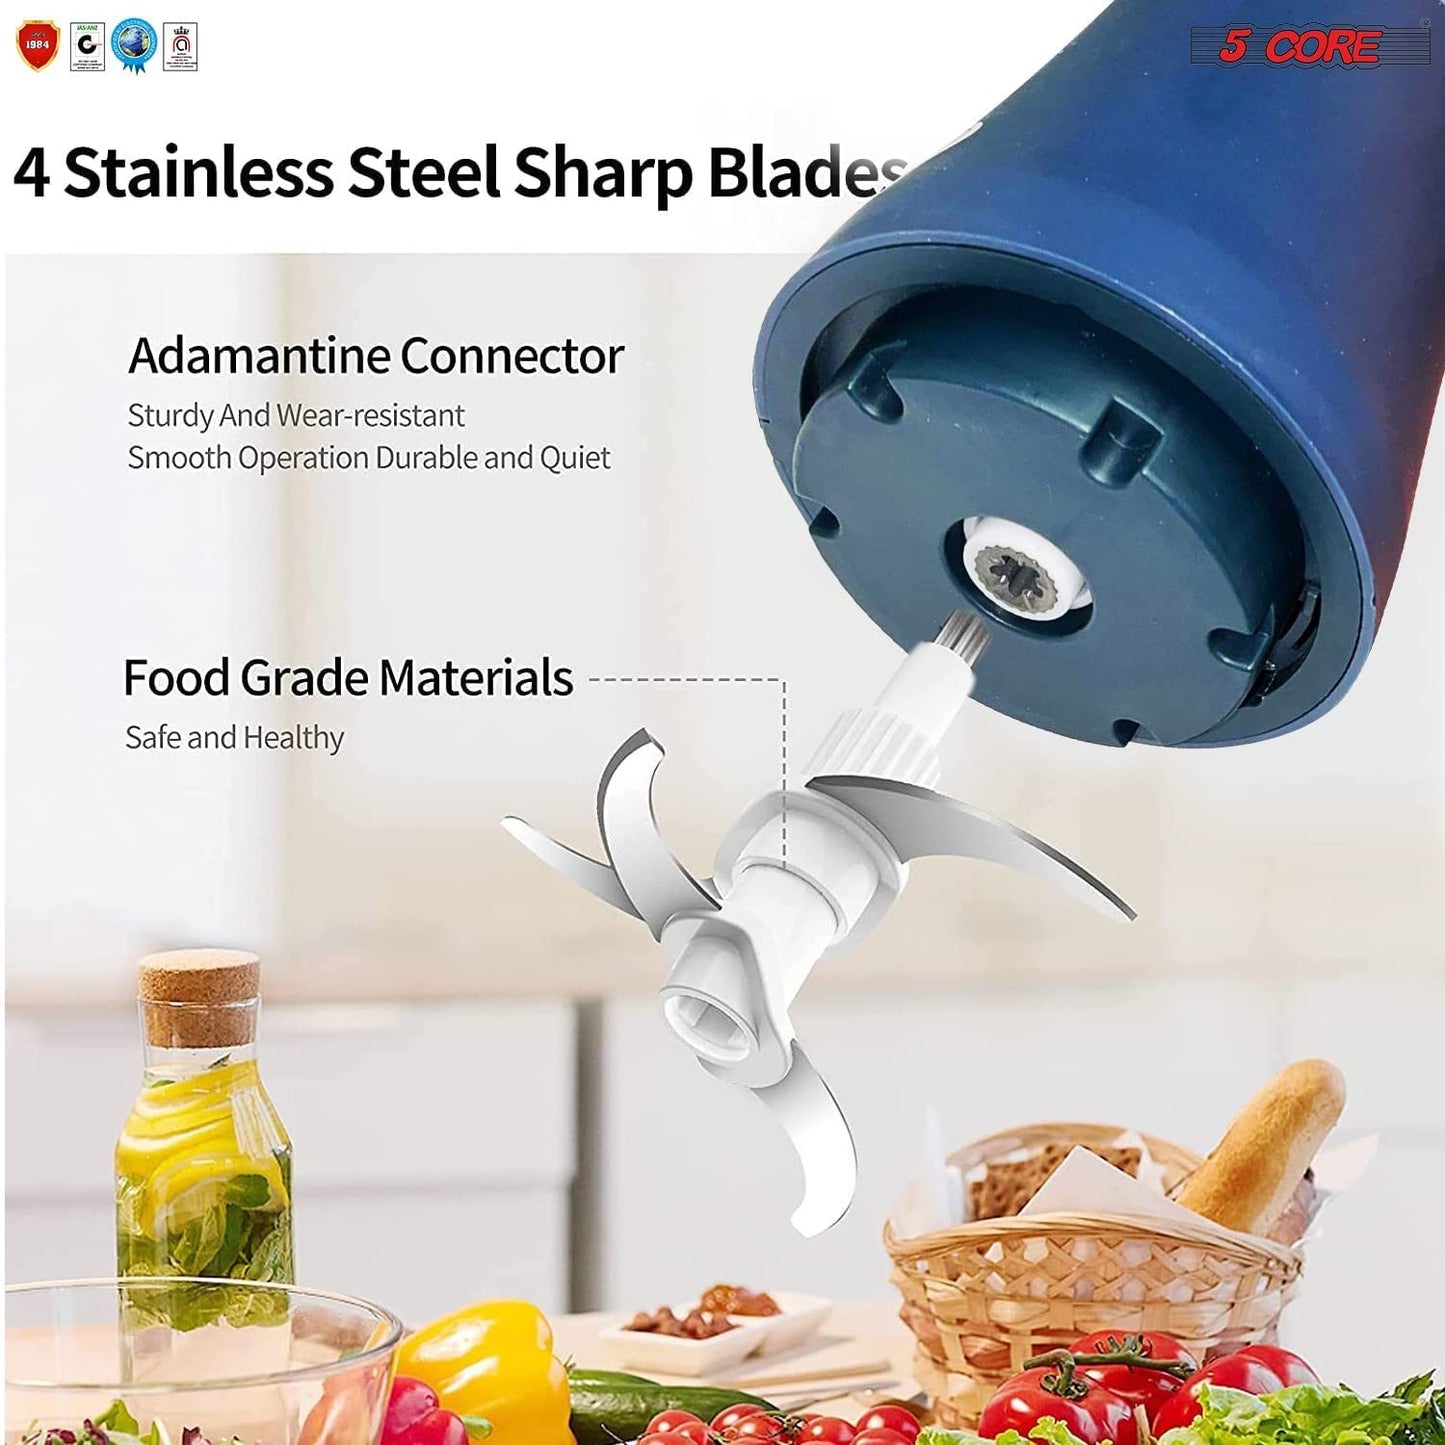 Premium Electric Meat Grinder Food Processor and 4 Titanium Blades; 12 Cup 2.2Qt Stainless Steel Large Bowl for Vegetables Fruit Salad Onion Garlic Meat Ice 300W Motor 5 Core MG S SSB